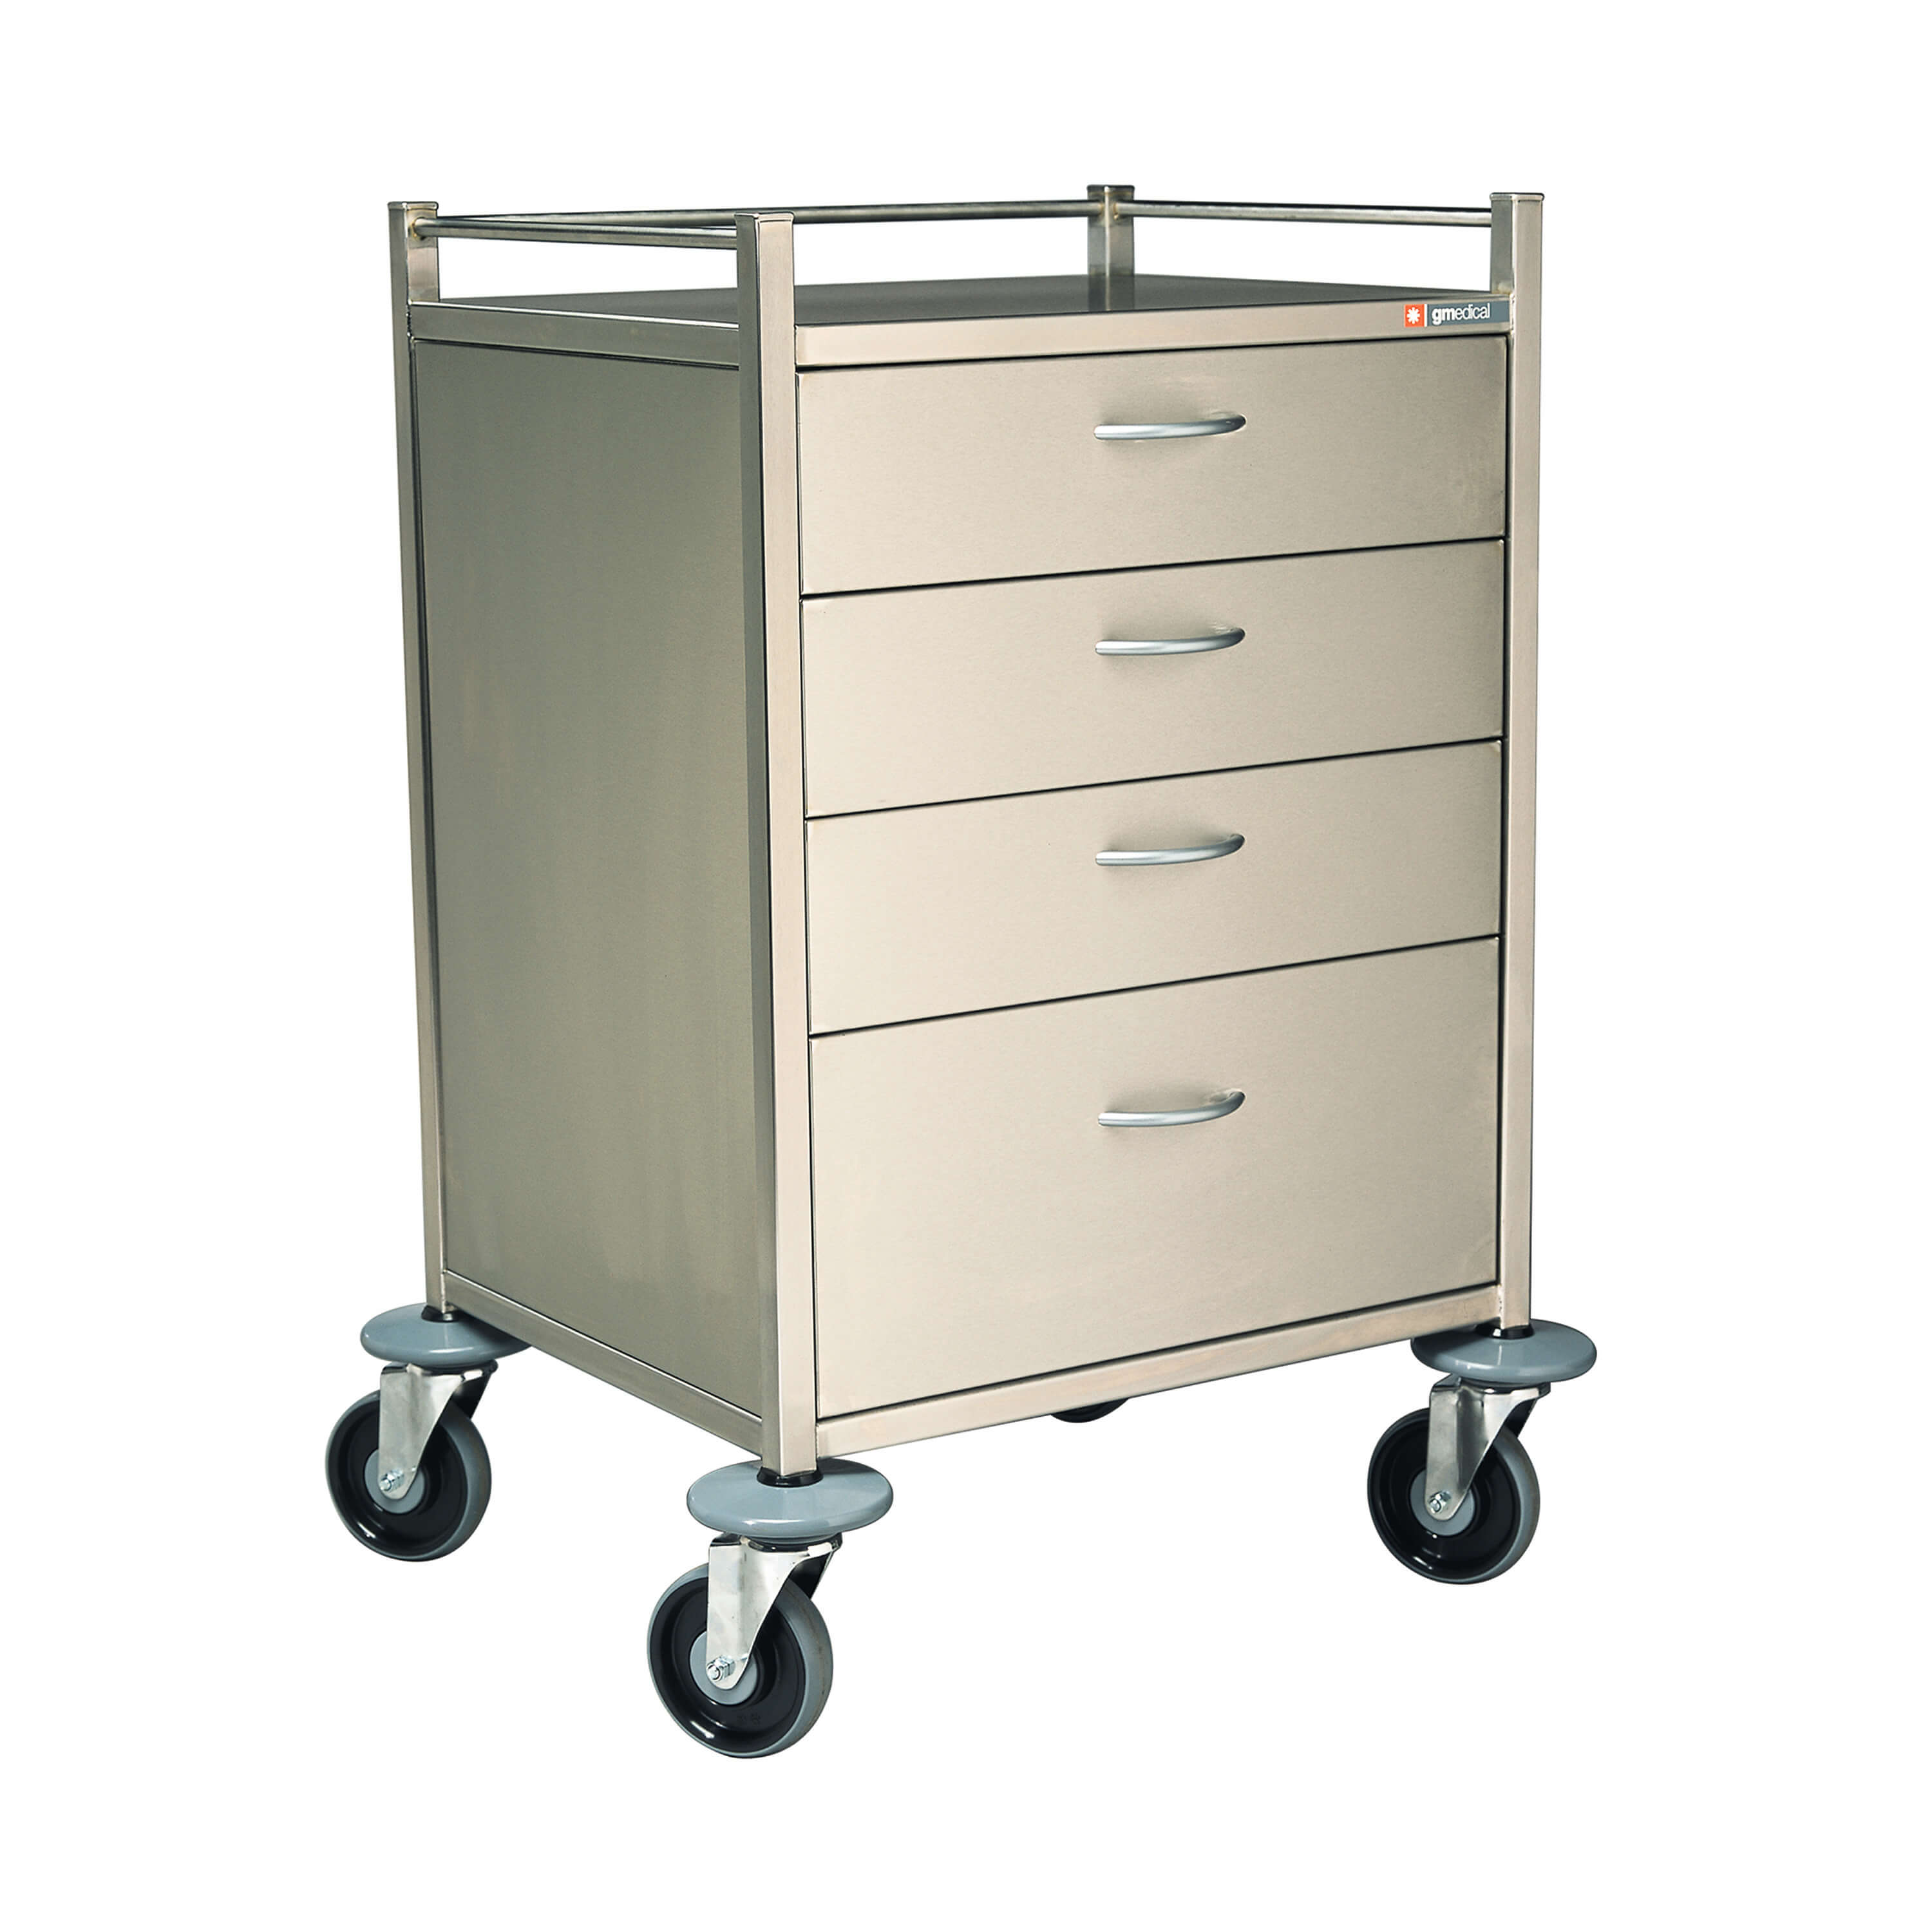 Hospital Furniture - Hospital Supplies - Medical Devices - All Products